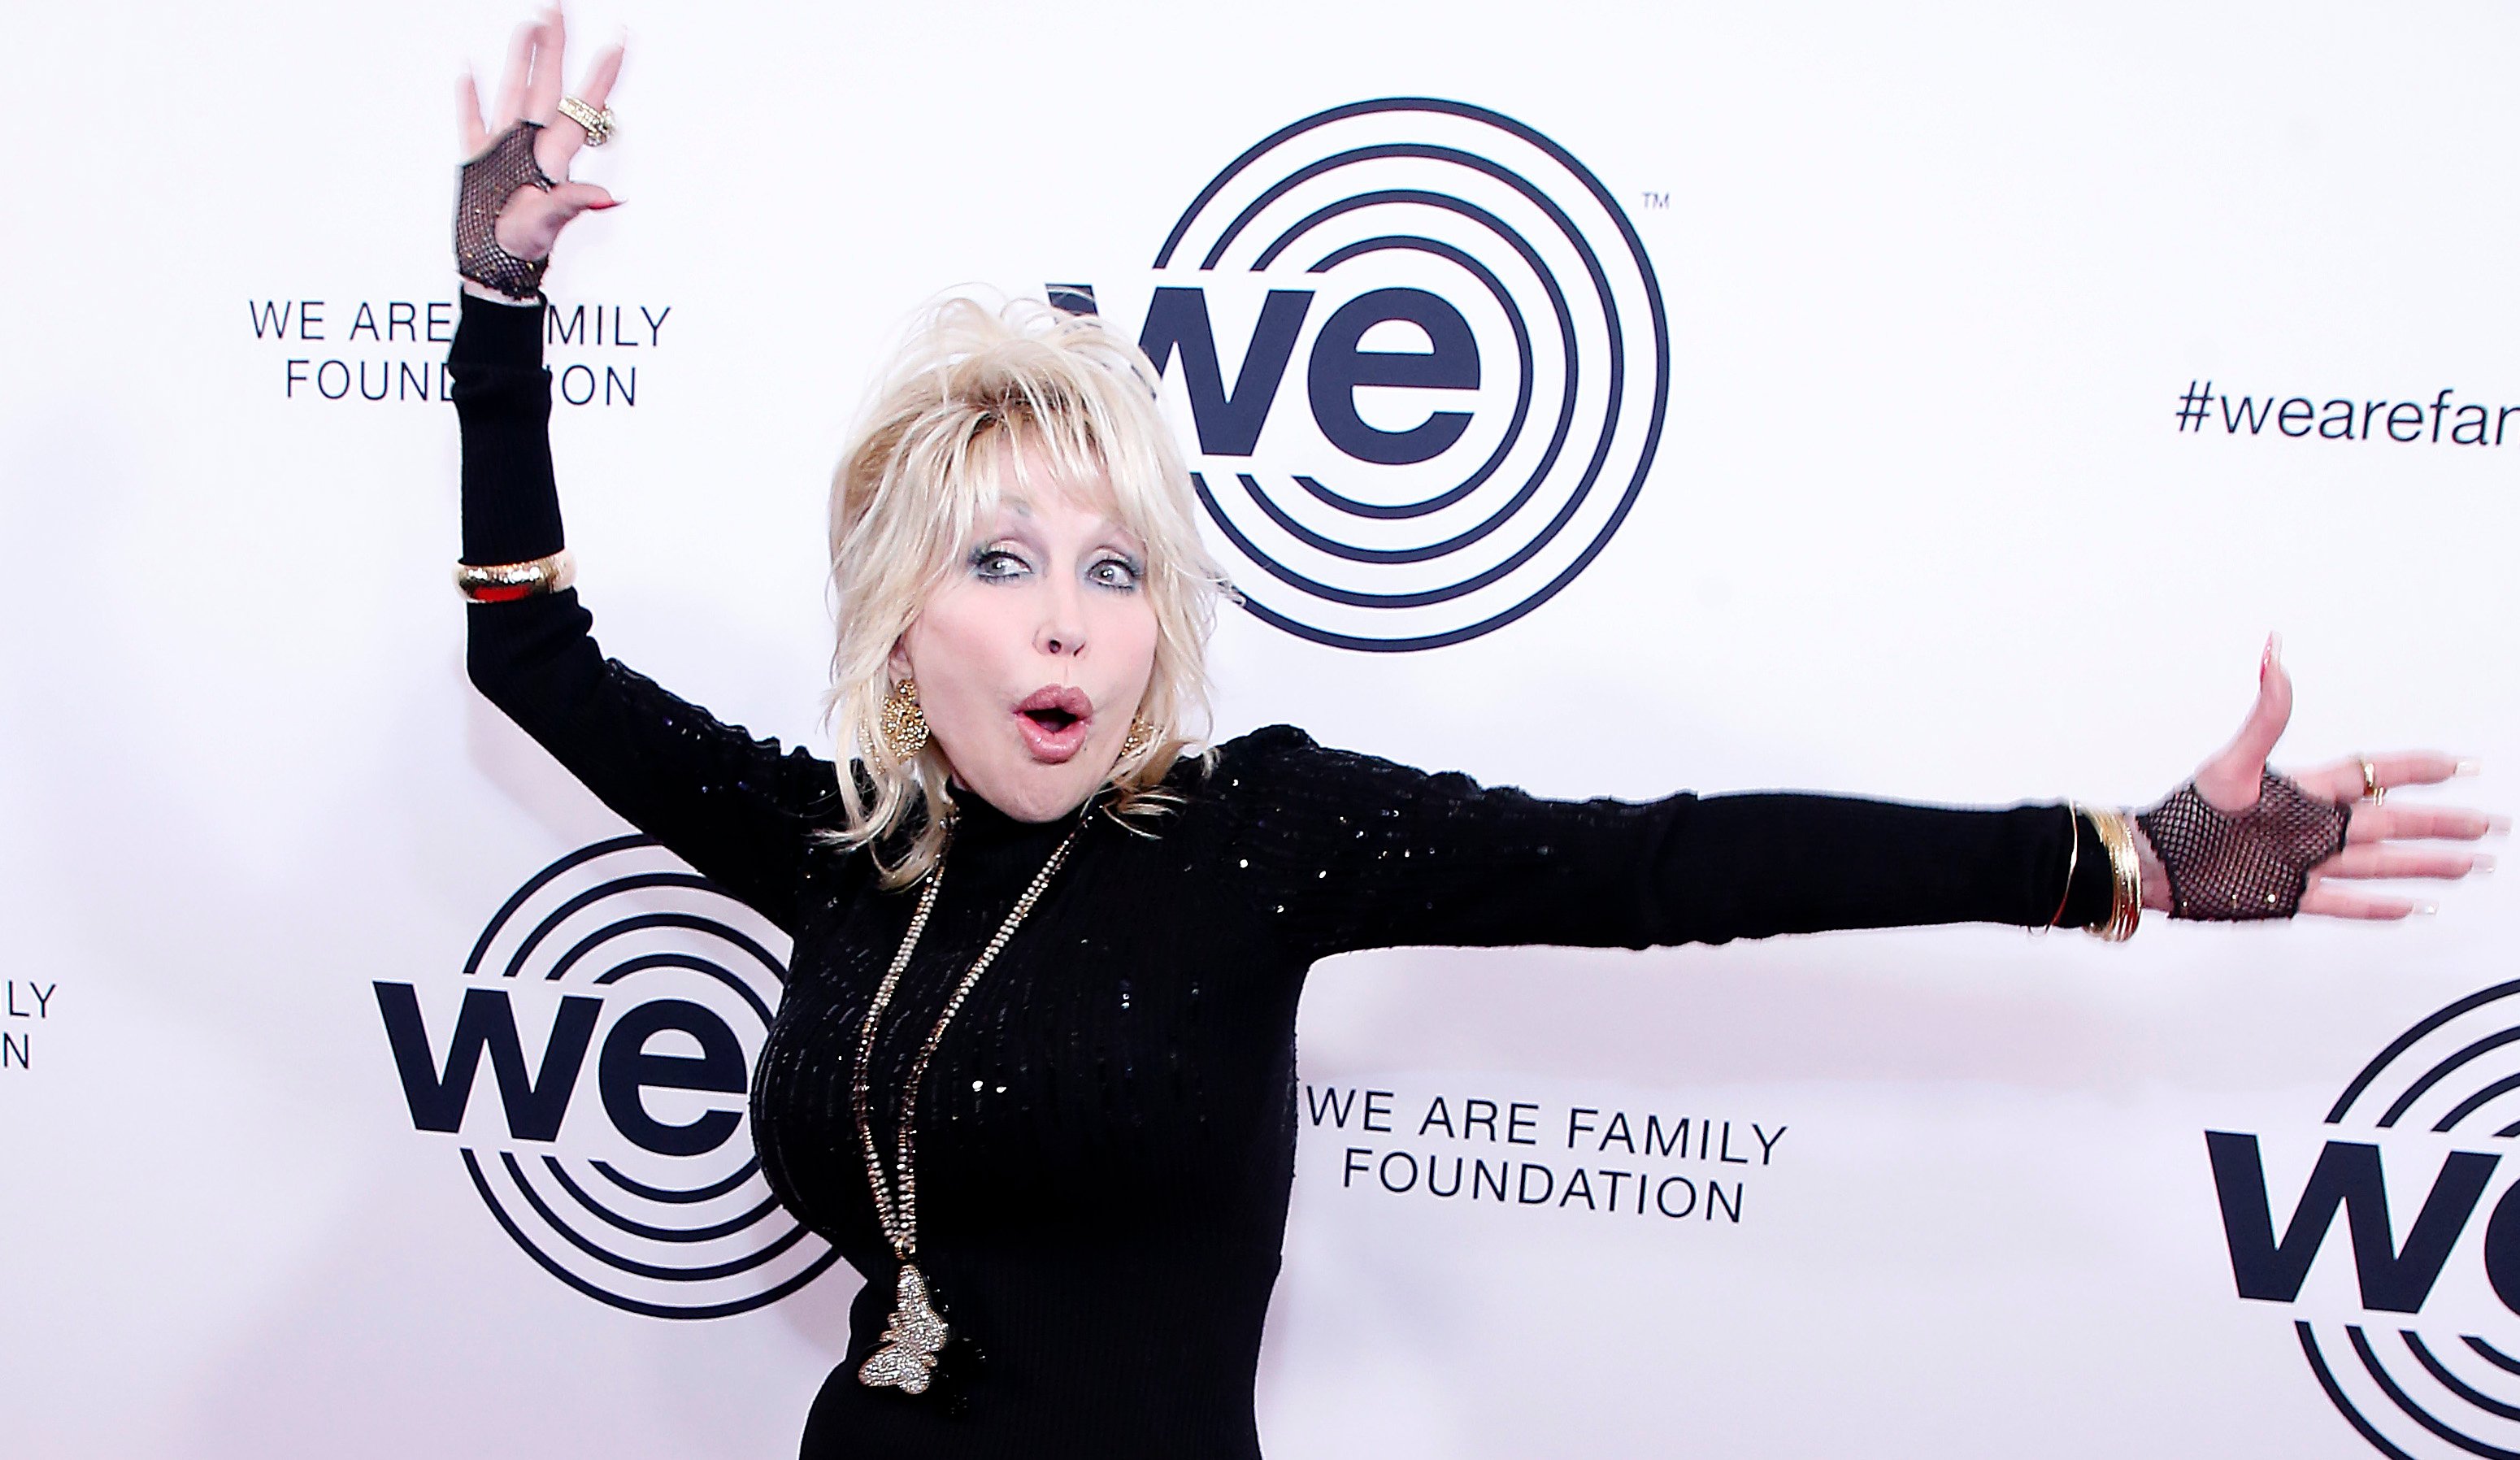 Dolly Parton poses for the camera with her arms waving and an expressive look of surprise on her face.